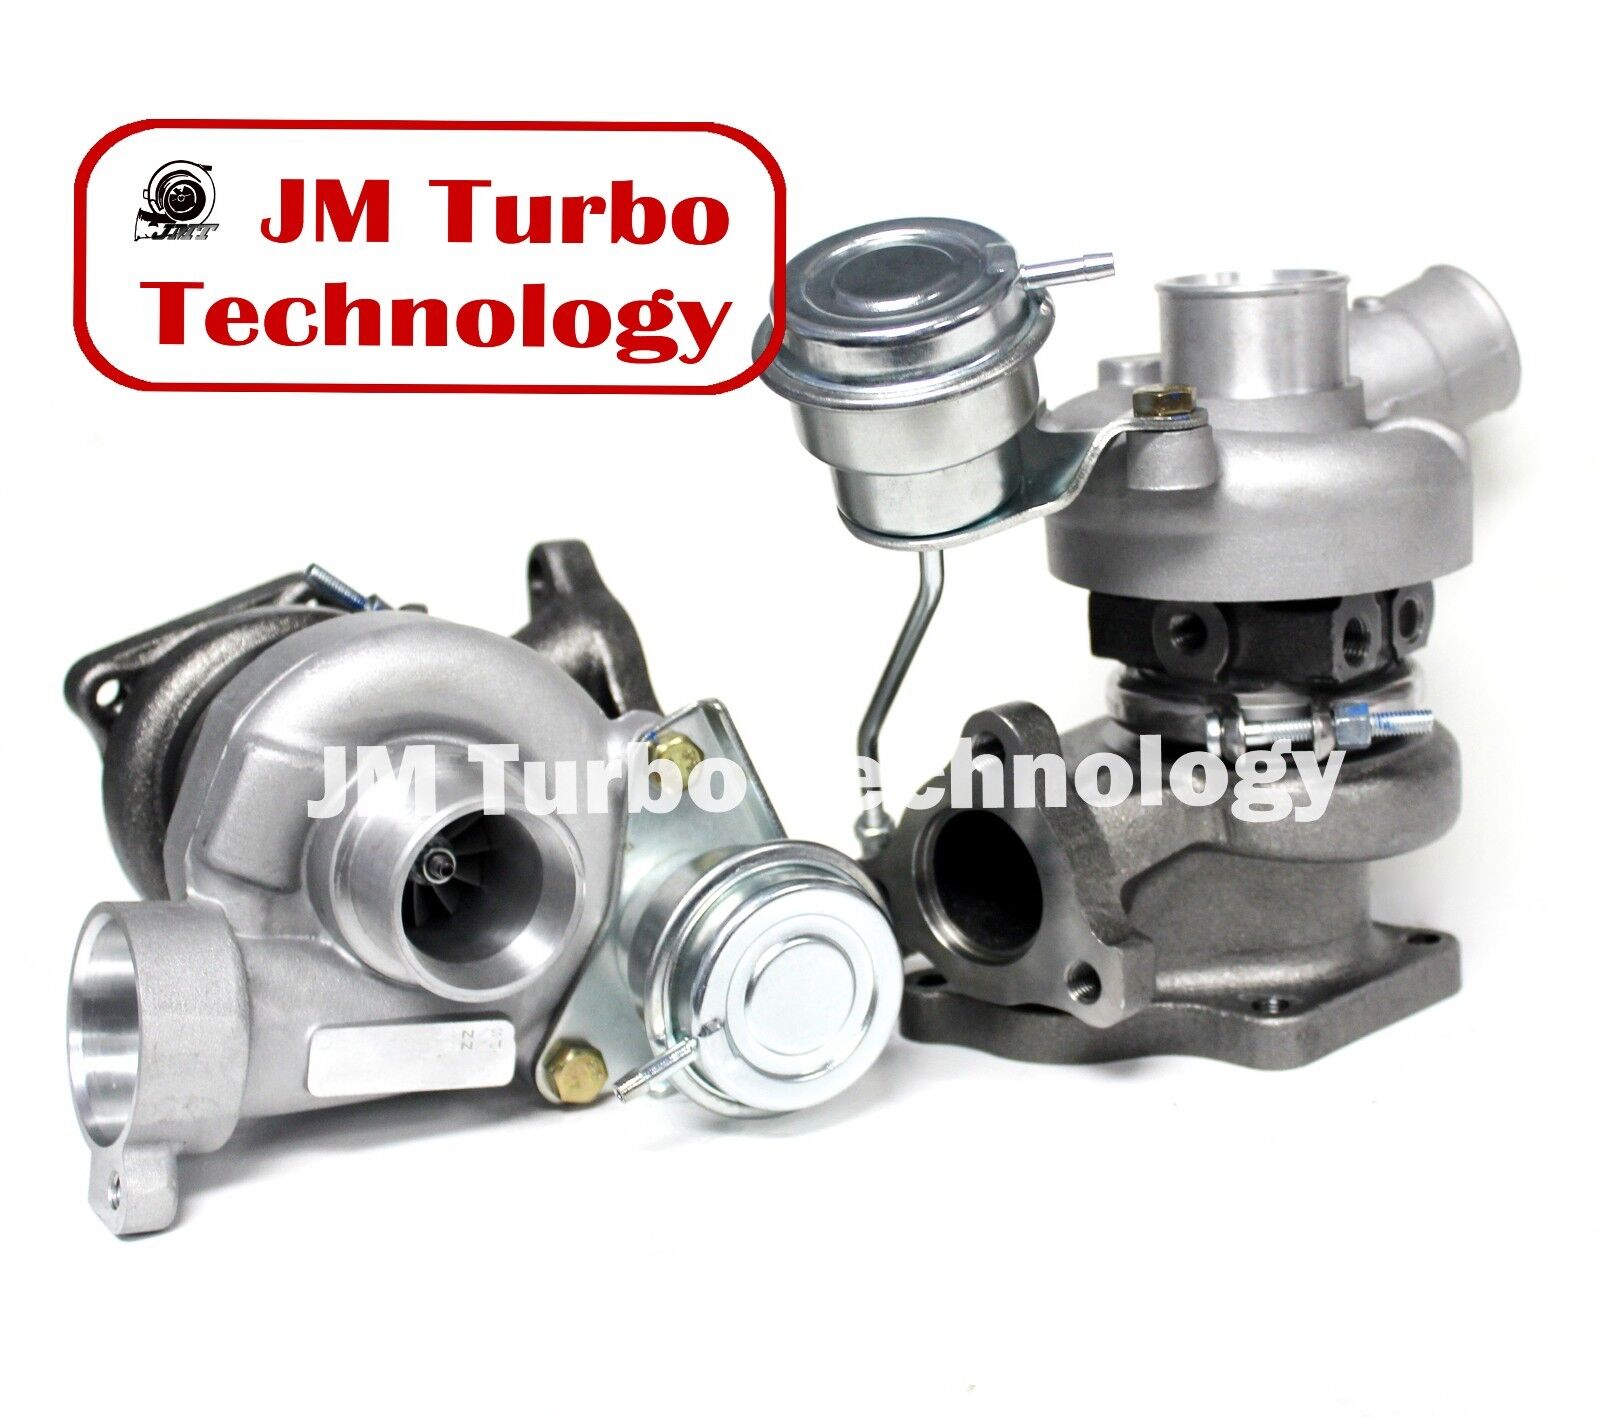 FOR 91-99 Mitsubishi 3000GT VR-4 / Dodge Stealth TD04 Twin Turbo Charger